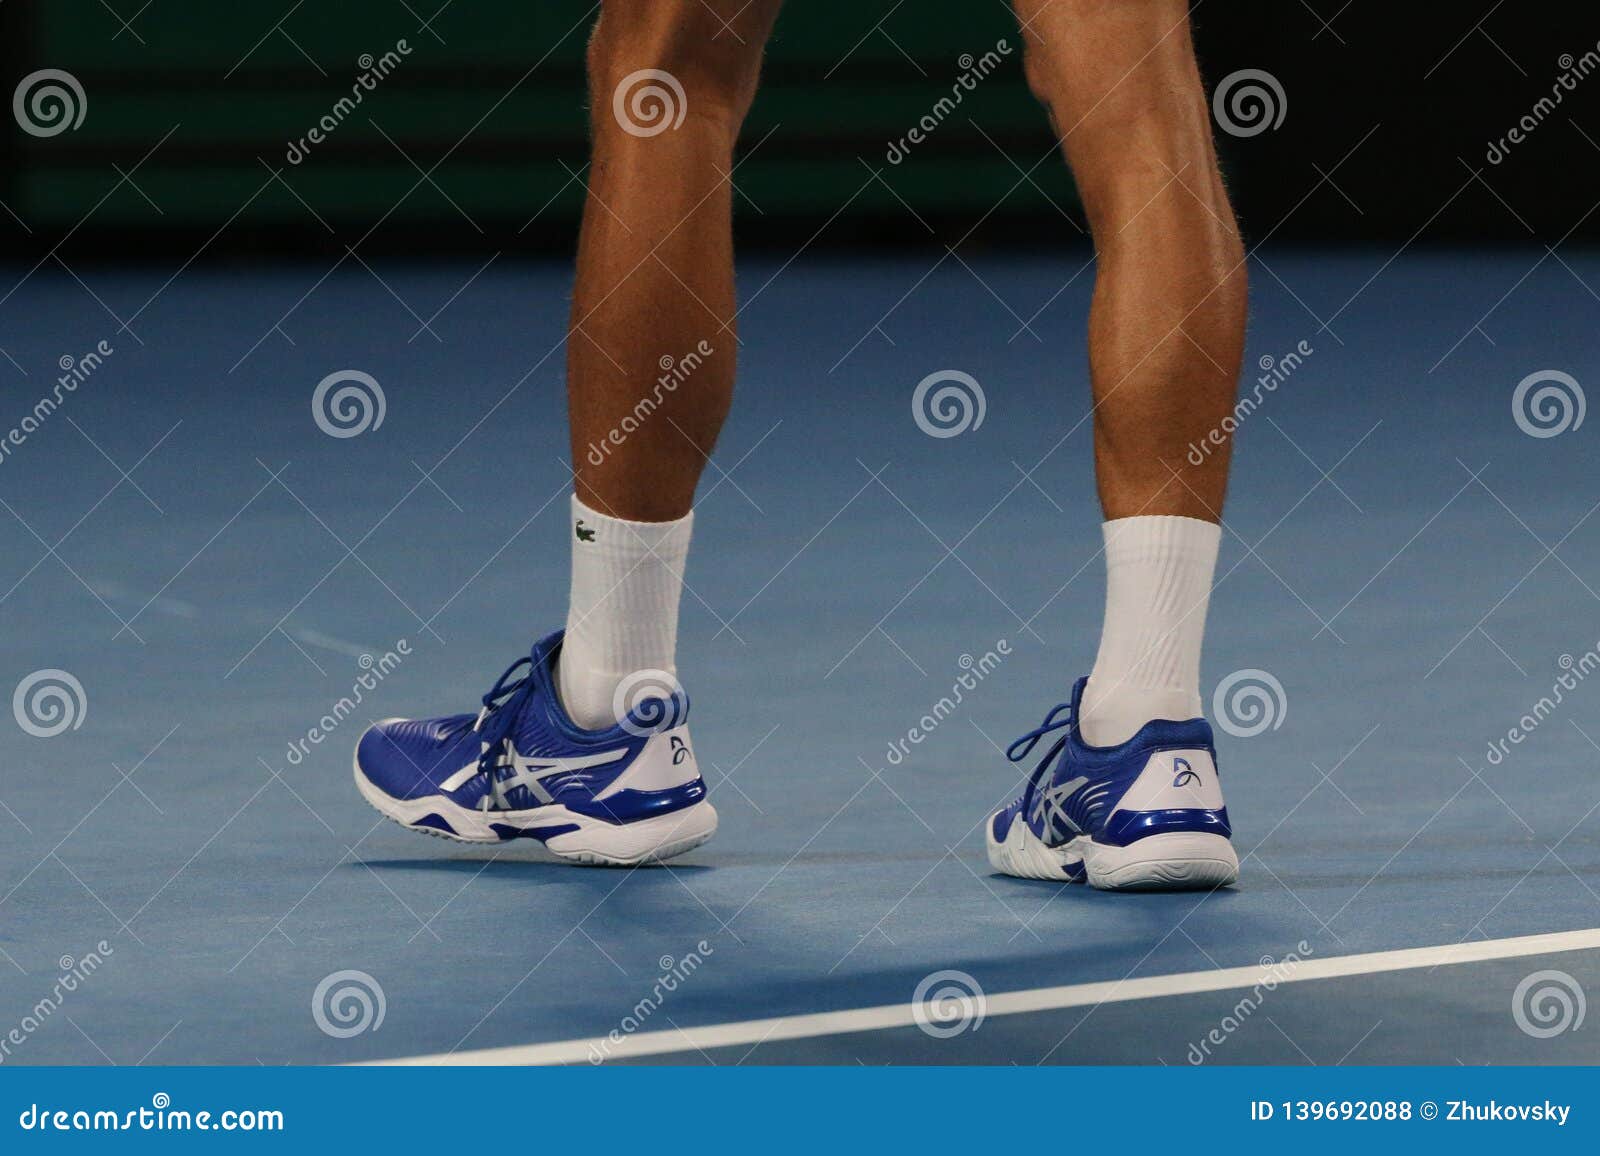 Grand Slam Champion Novak Djokovic Of Serbia Wears Custom Asis Tennis Shoes During His Final Match At 2019 Australian Open Editorial Stock Photo Image Of Arena Backhand 139692088